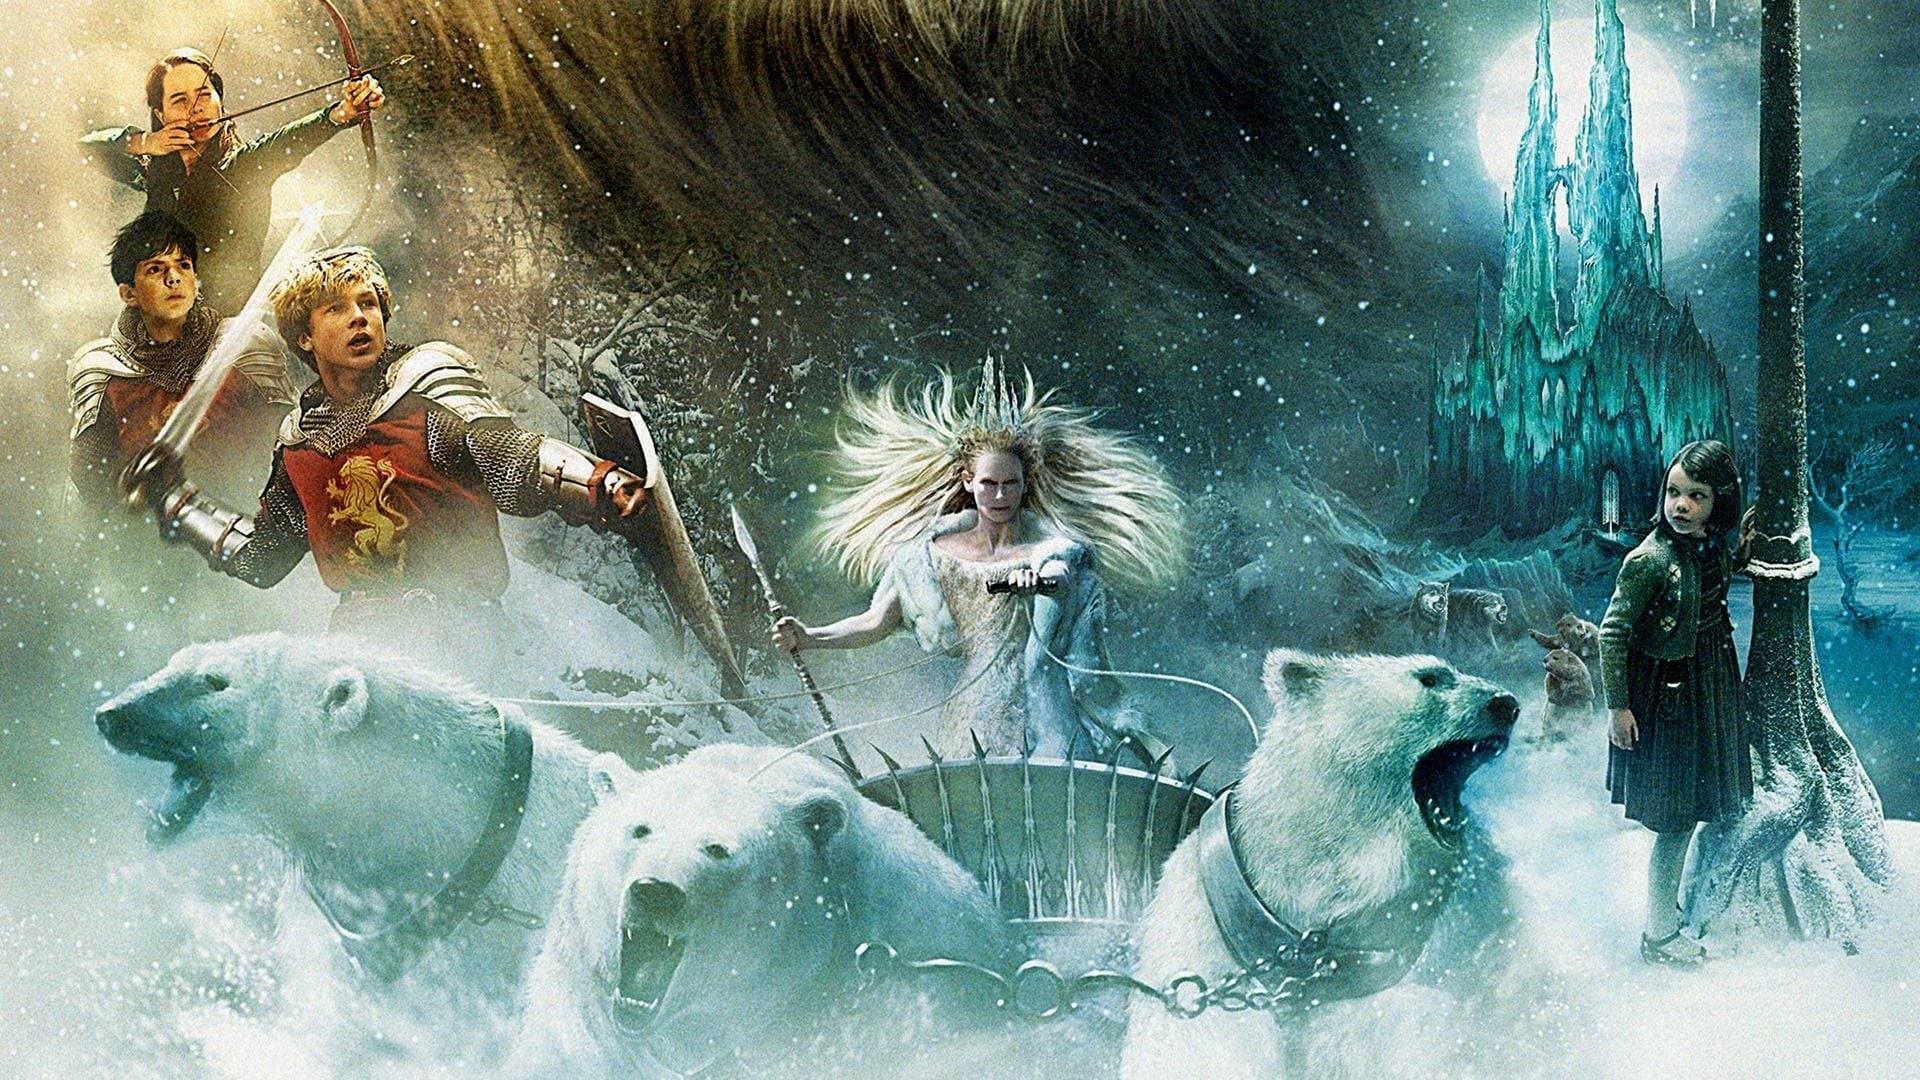 The Chronicles of Narnia: The Lion, the Witch and the Wardrobe 2005 Soap2Day